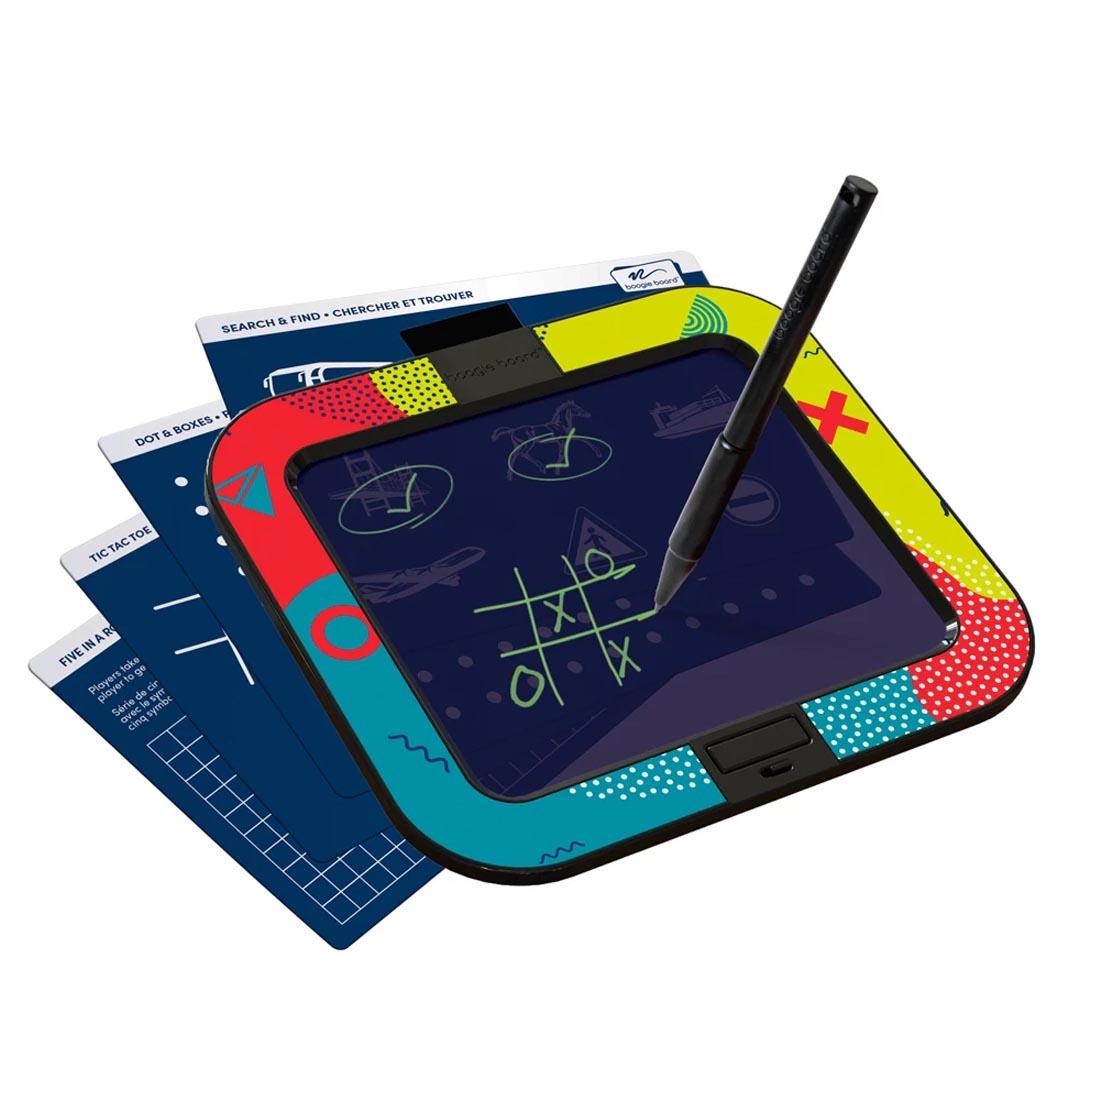 Boogie Board Dash with Activity Cards behind it and a game of tic-tac-toe on the screen